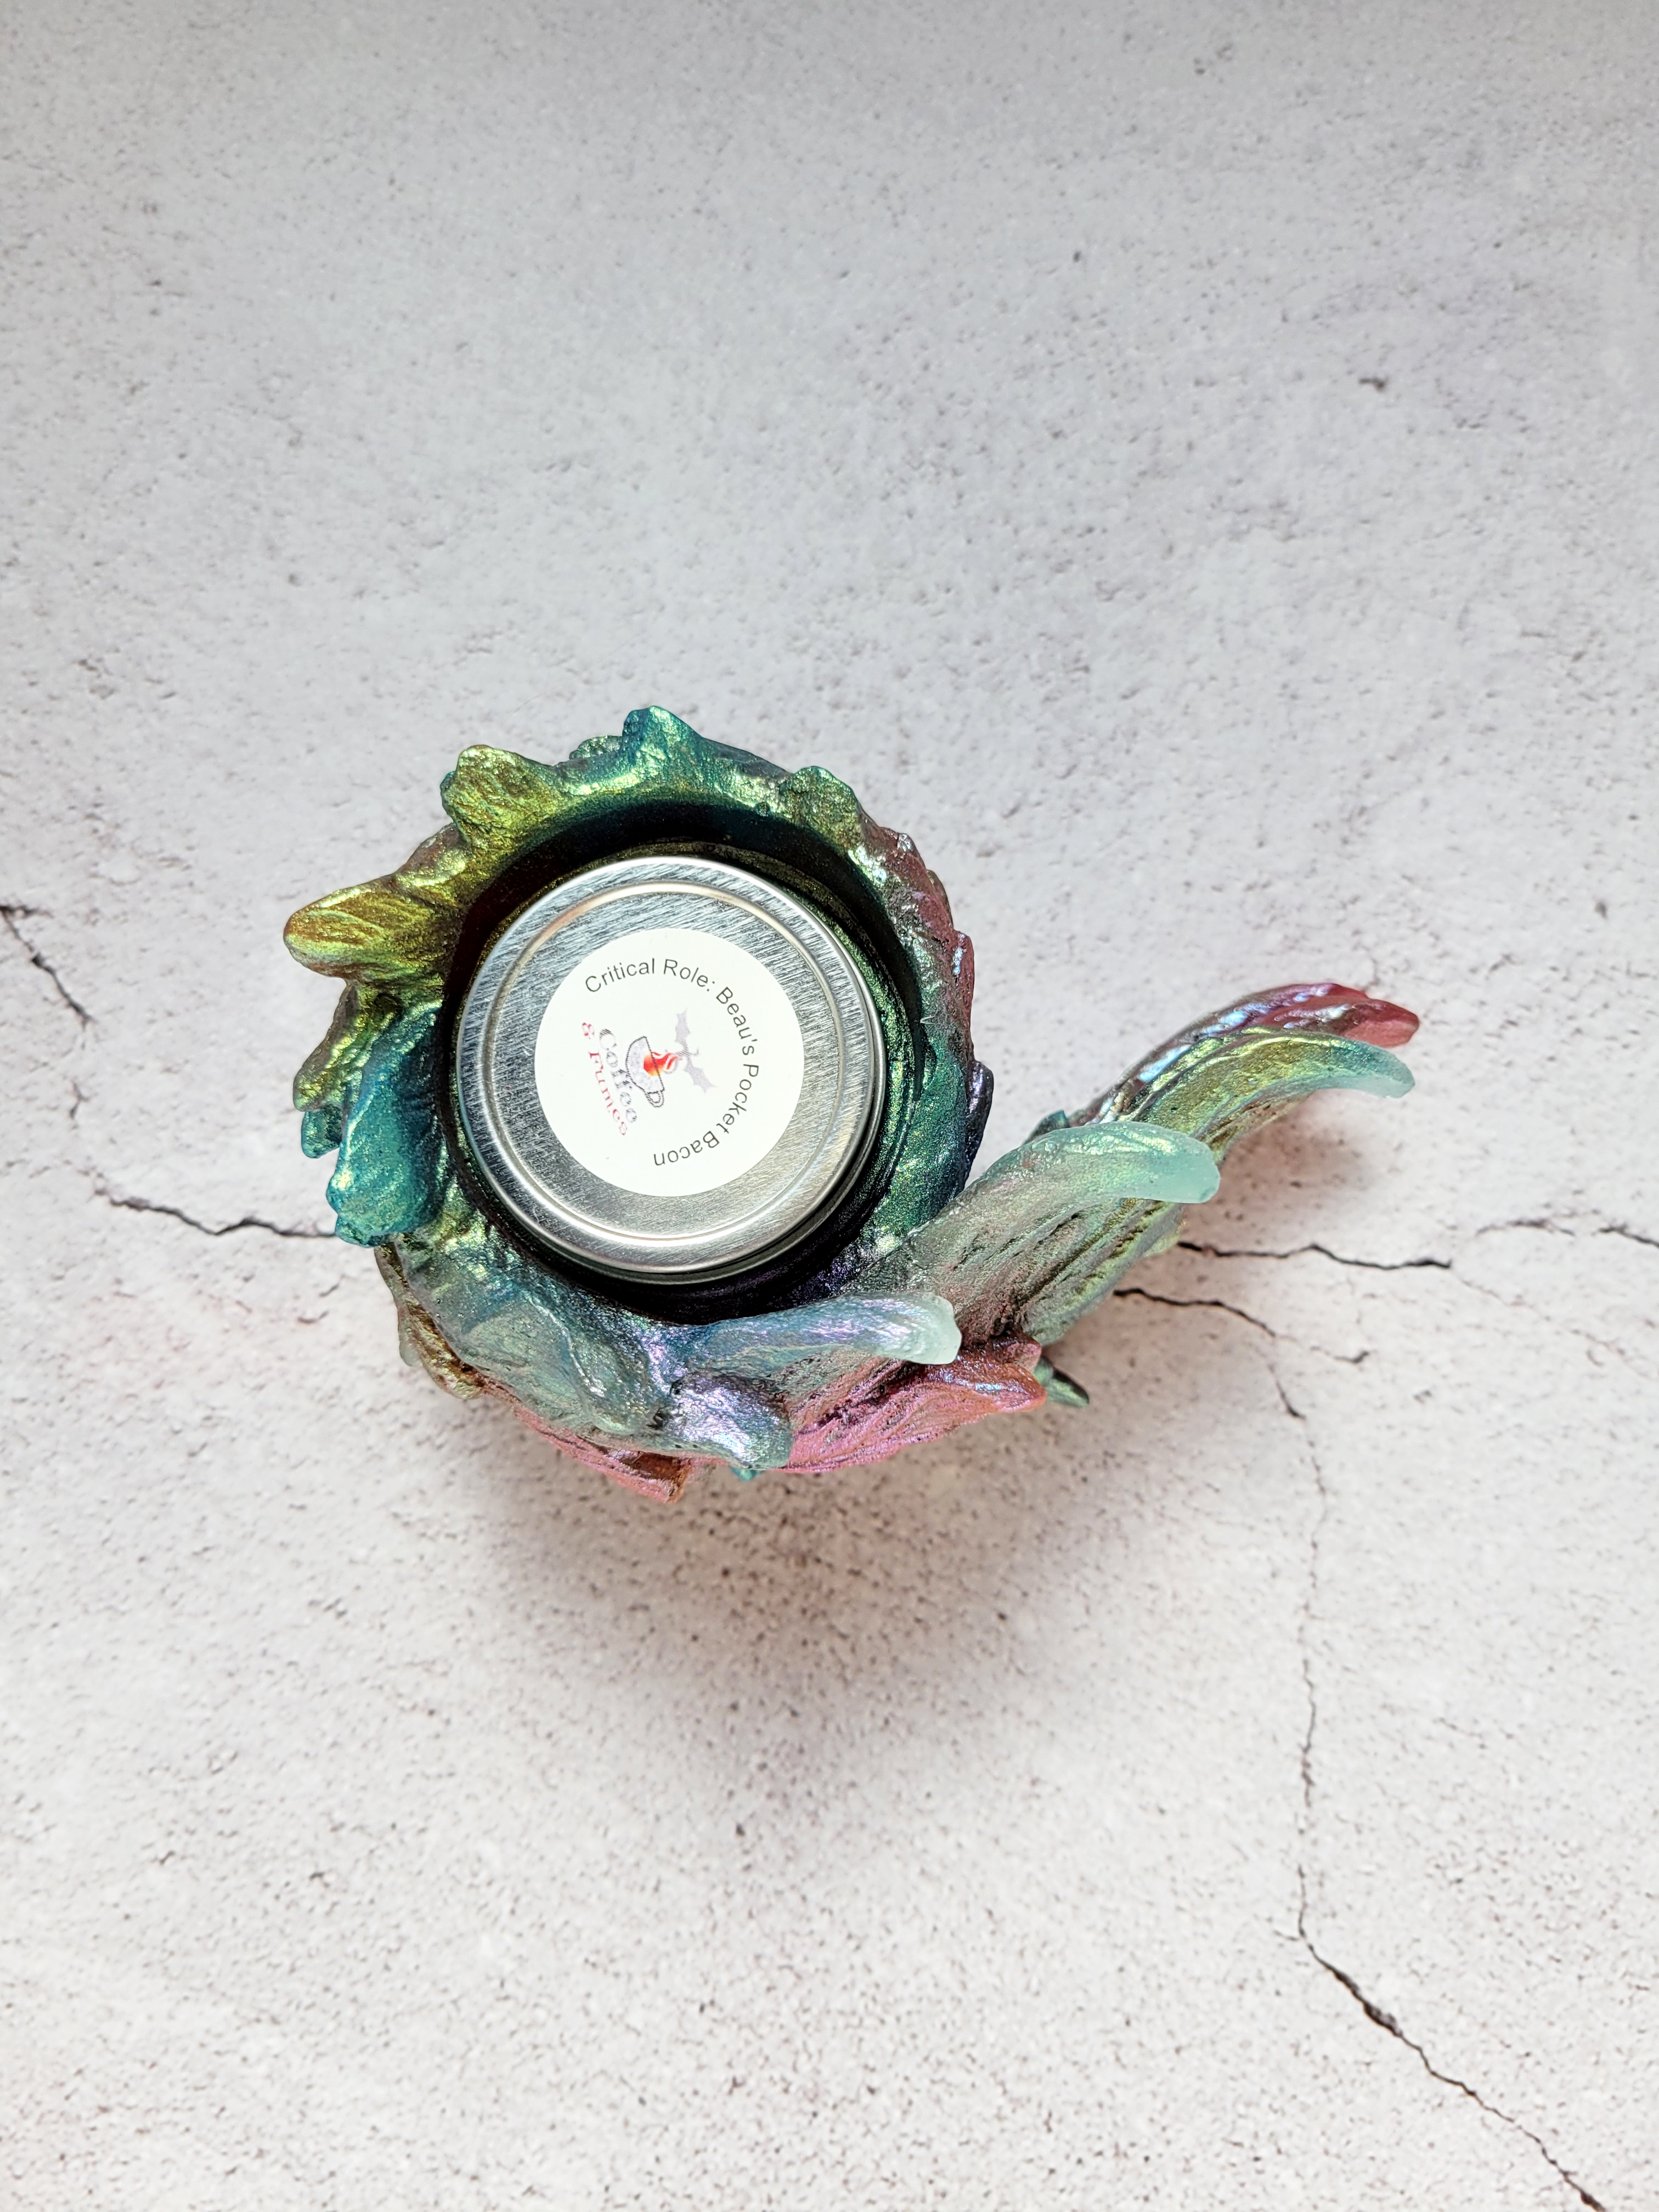 A top view of a tealight candle holder in the style of a bird's wing. It's feathers a textured. It's colorshifting reds, greens, blues. There's a tealight inside to show size comparison.